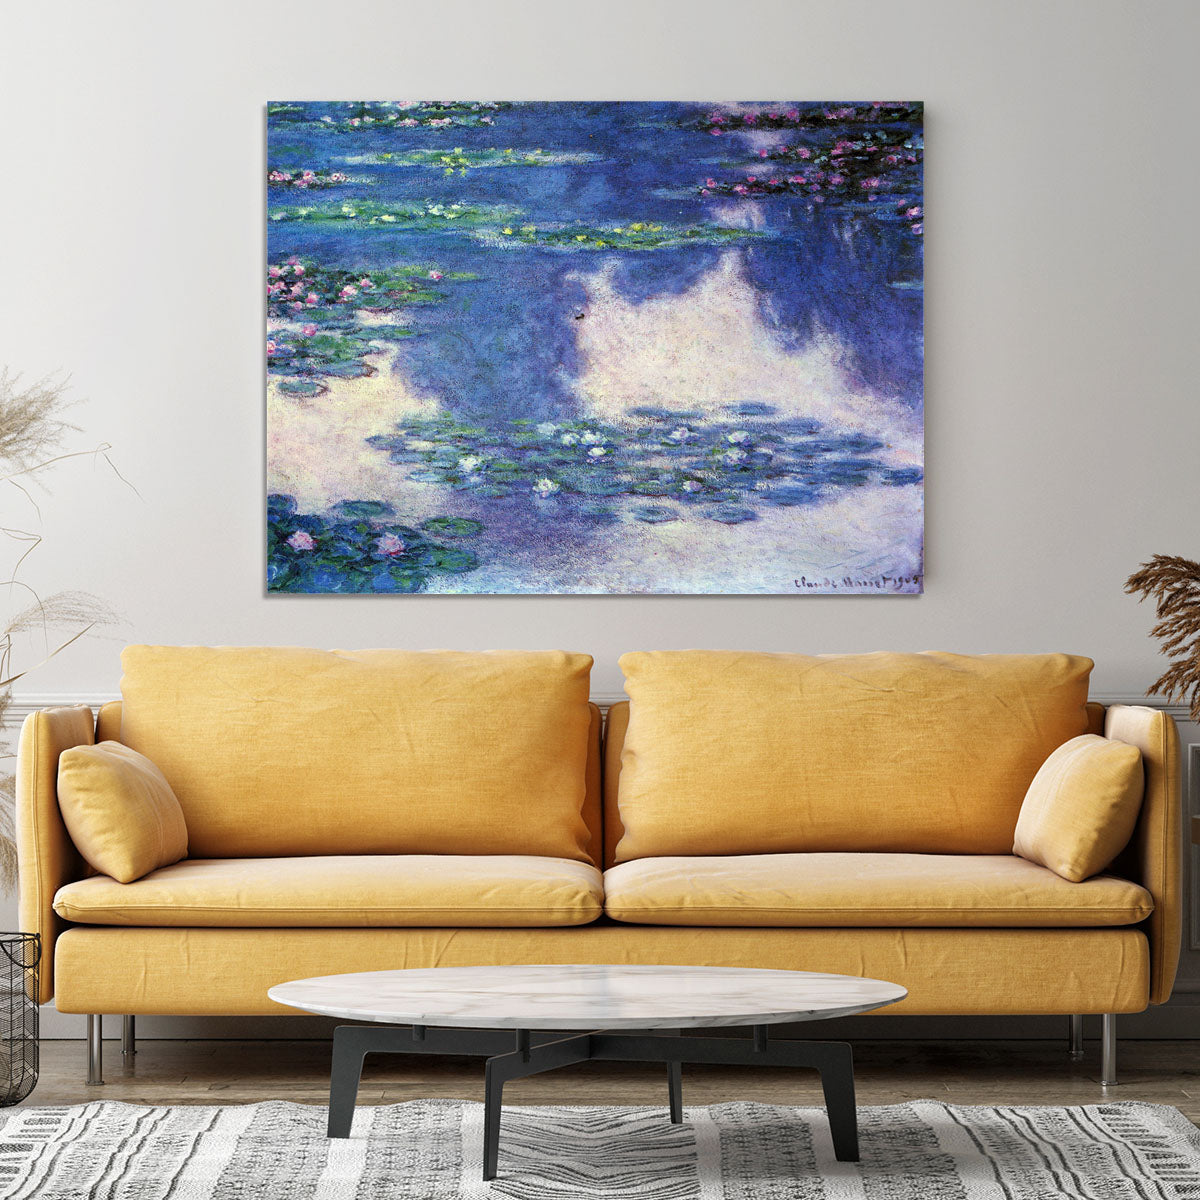 Water lilies water landscape 4 by Monet Canvas Print or Poster - Canvas Art Rocks - 4